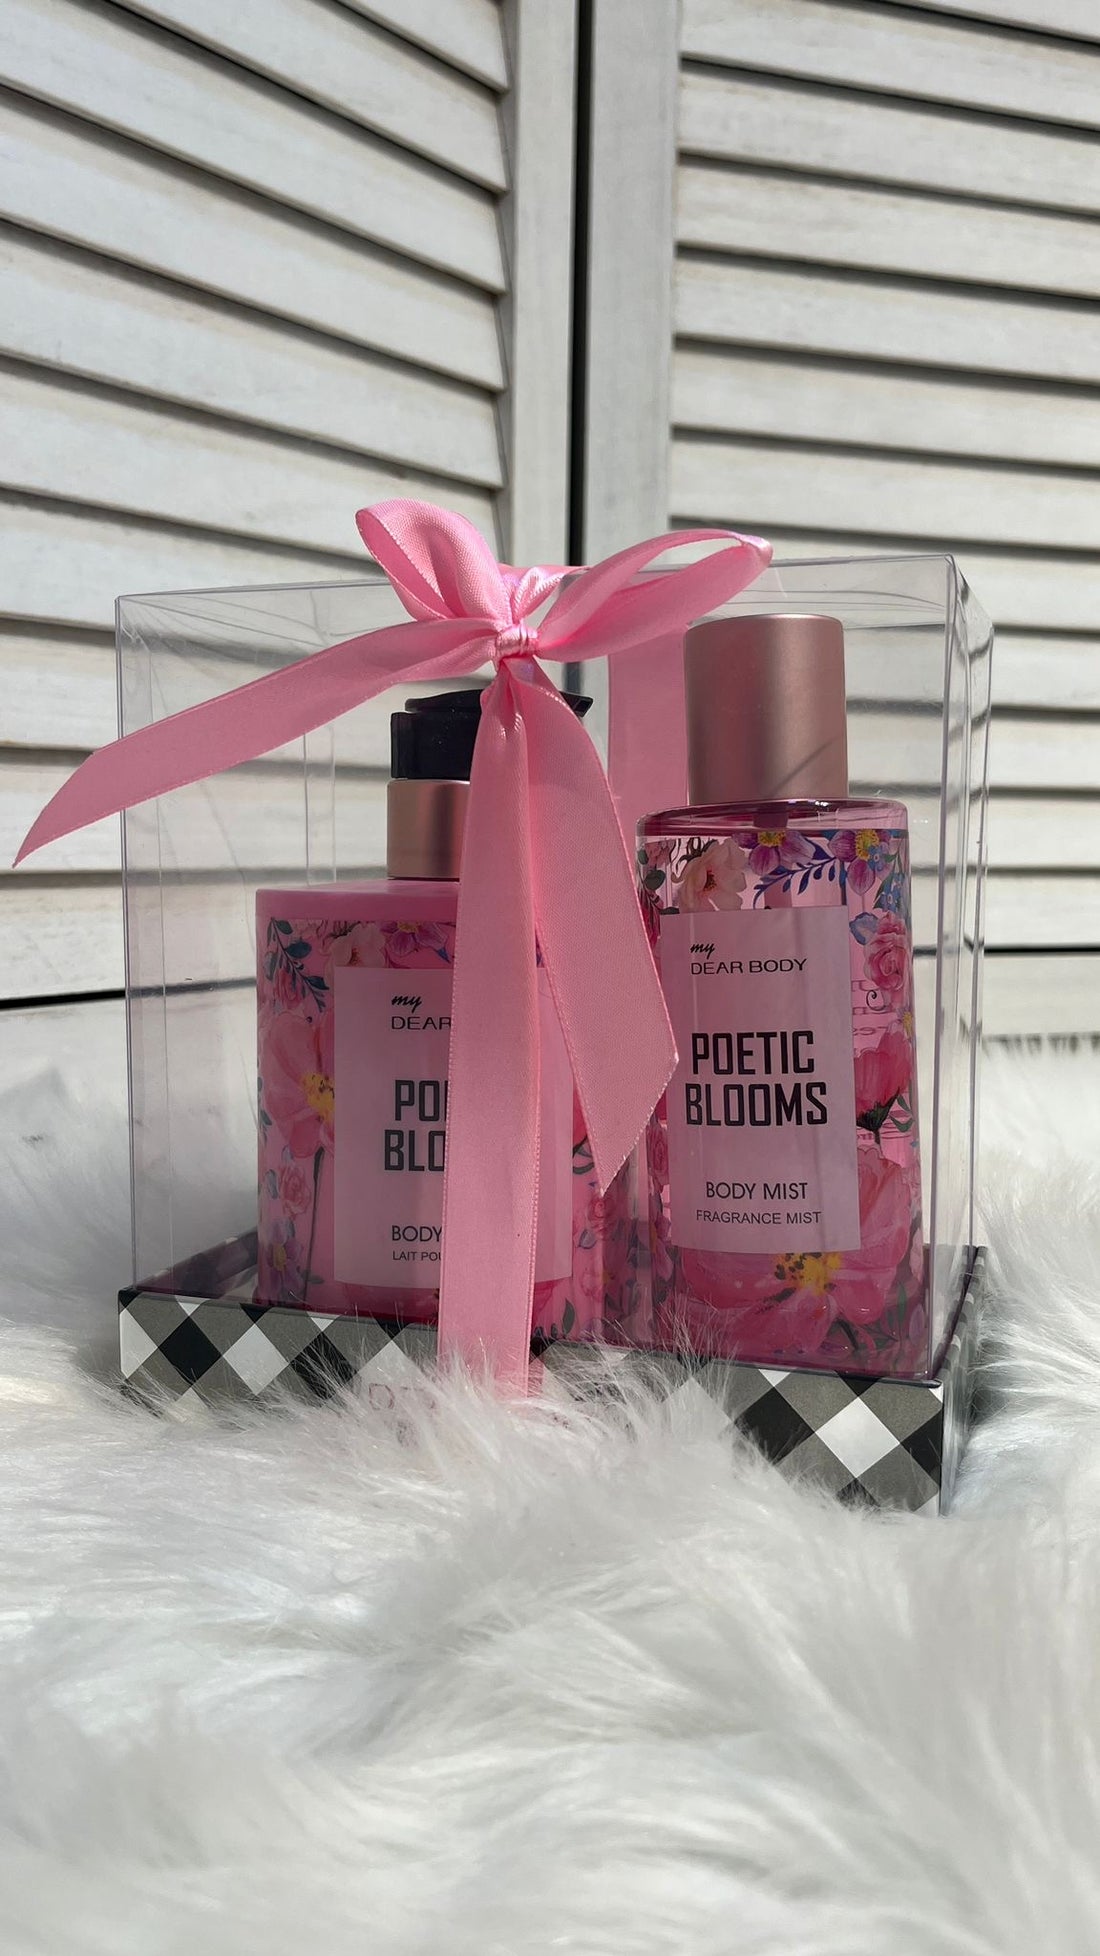 Dearbody mist and body lotion package